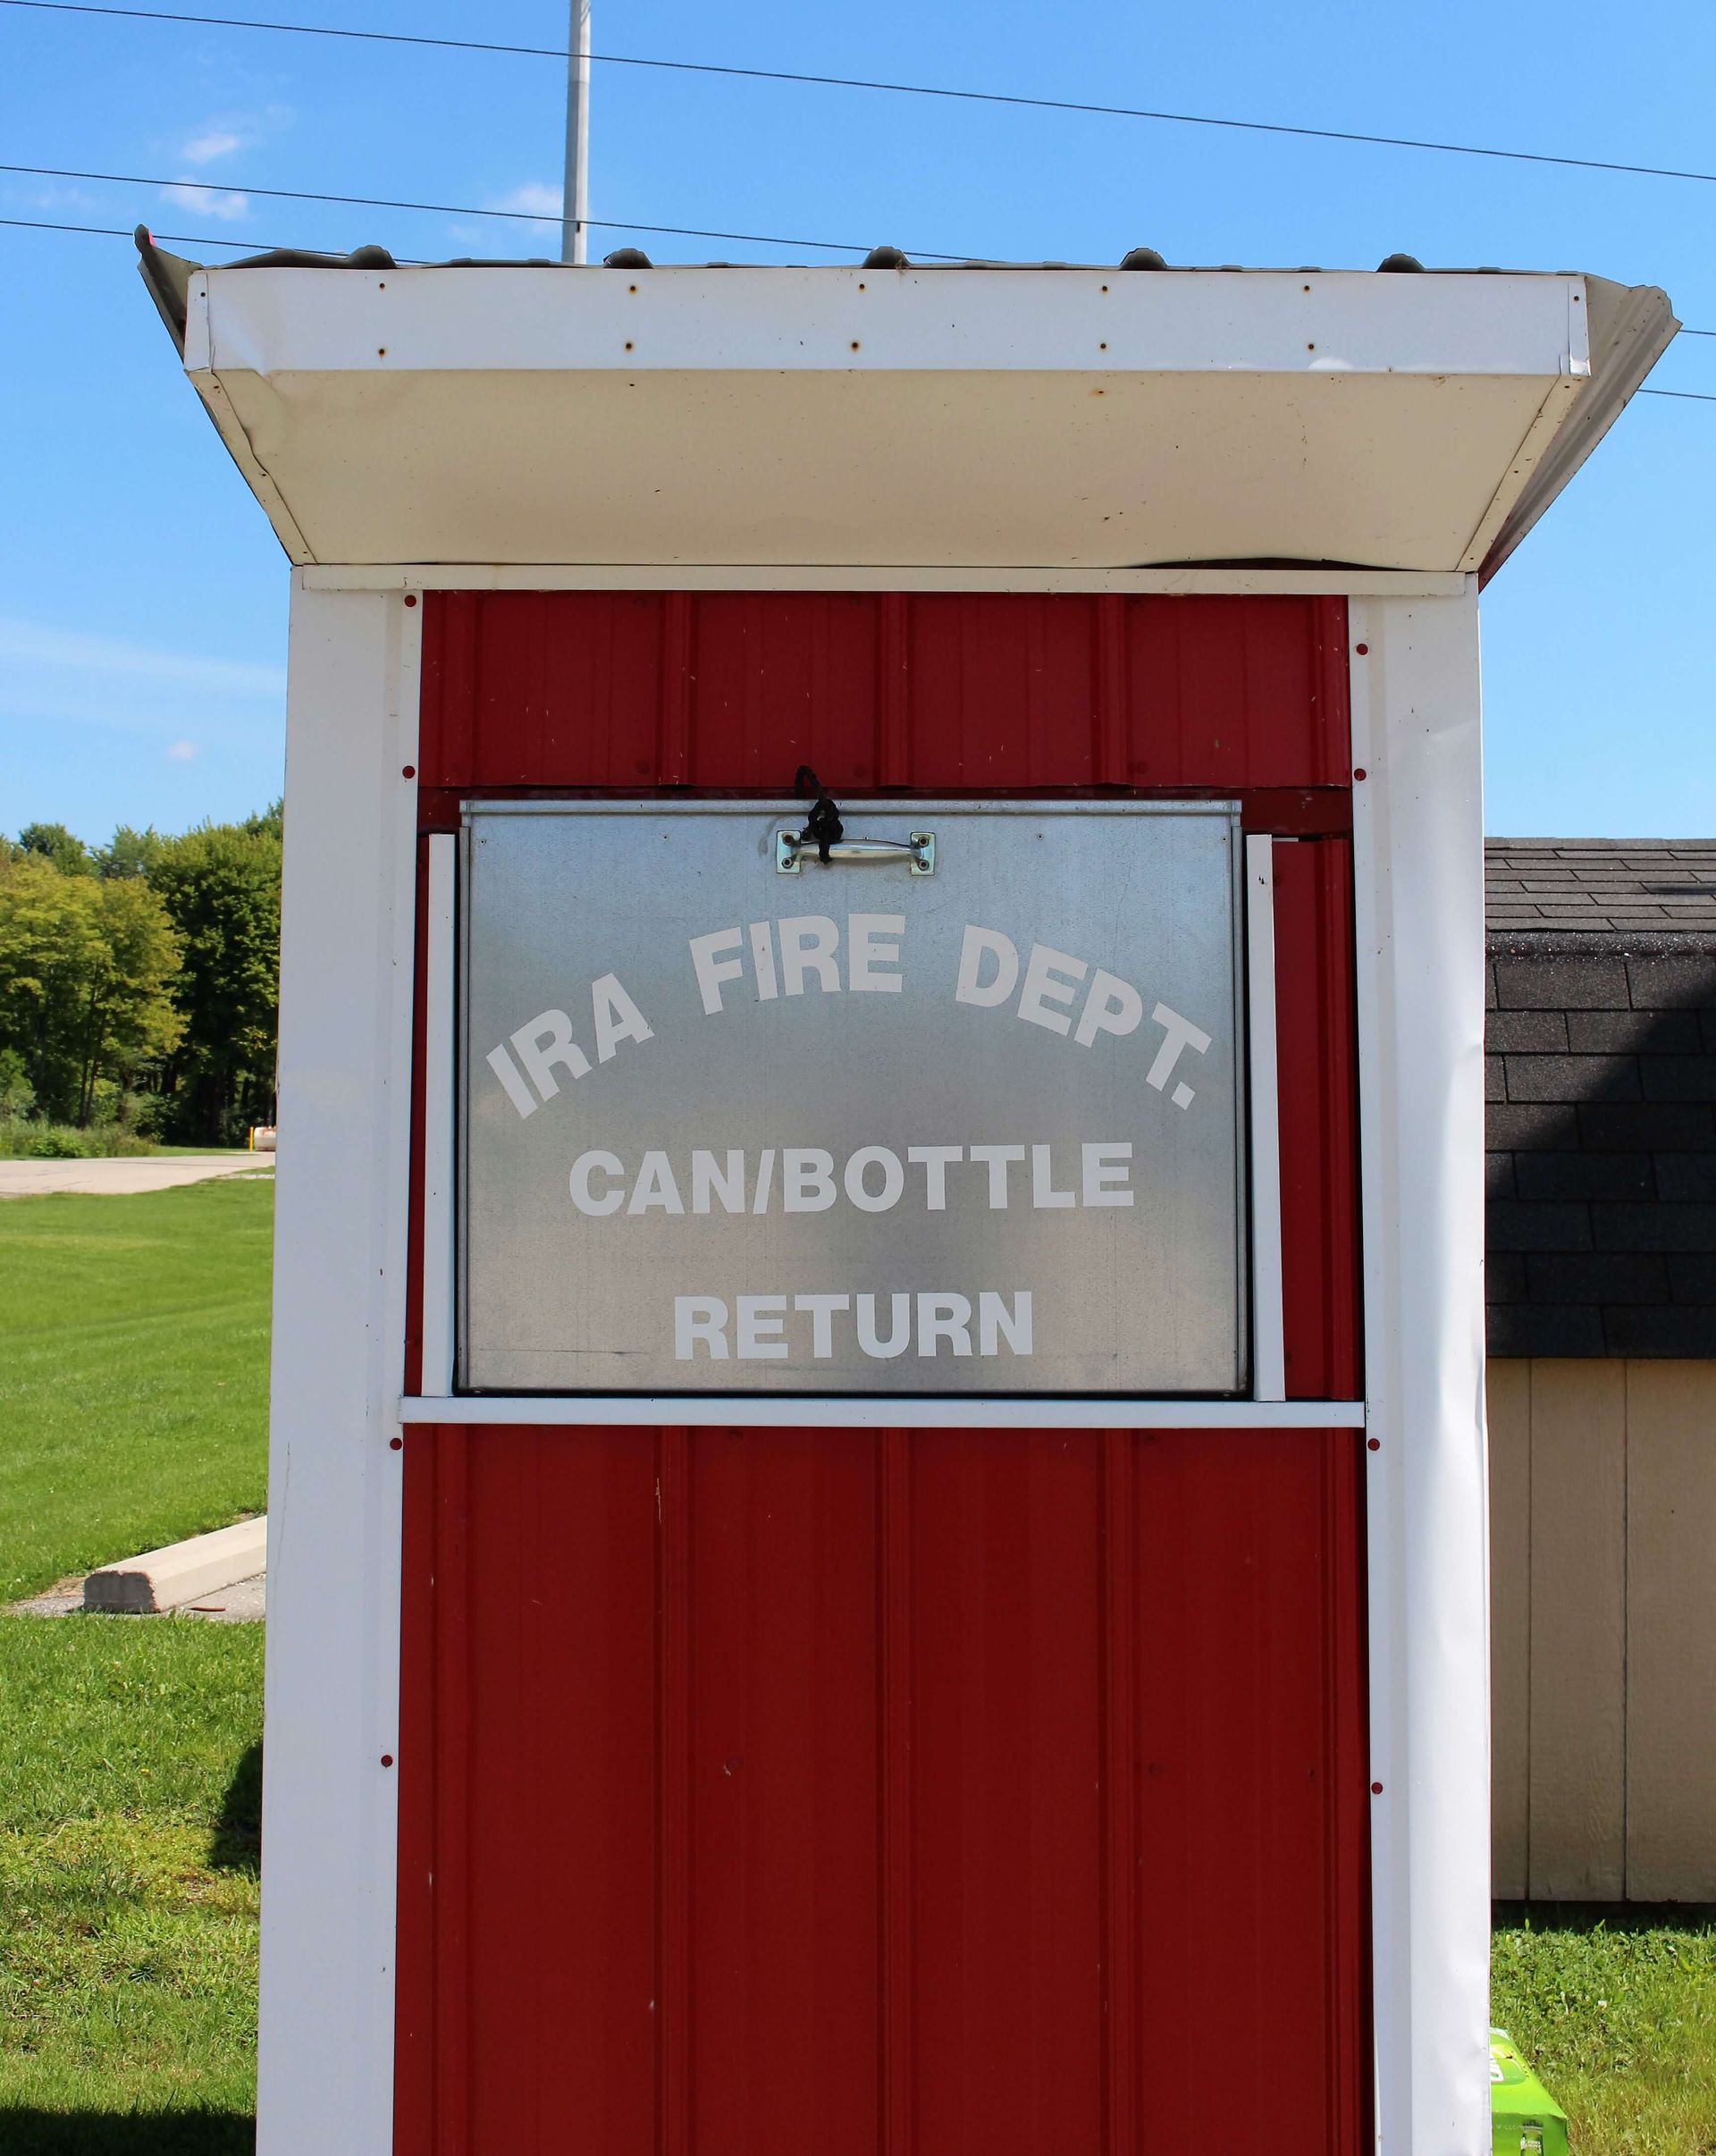 A red and white building with a sign that says Ira Fire Dept. Can/Bottle Return.